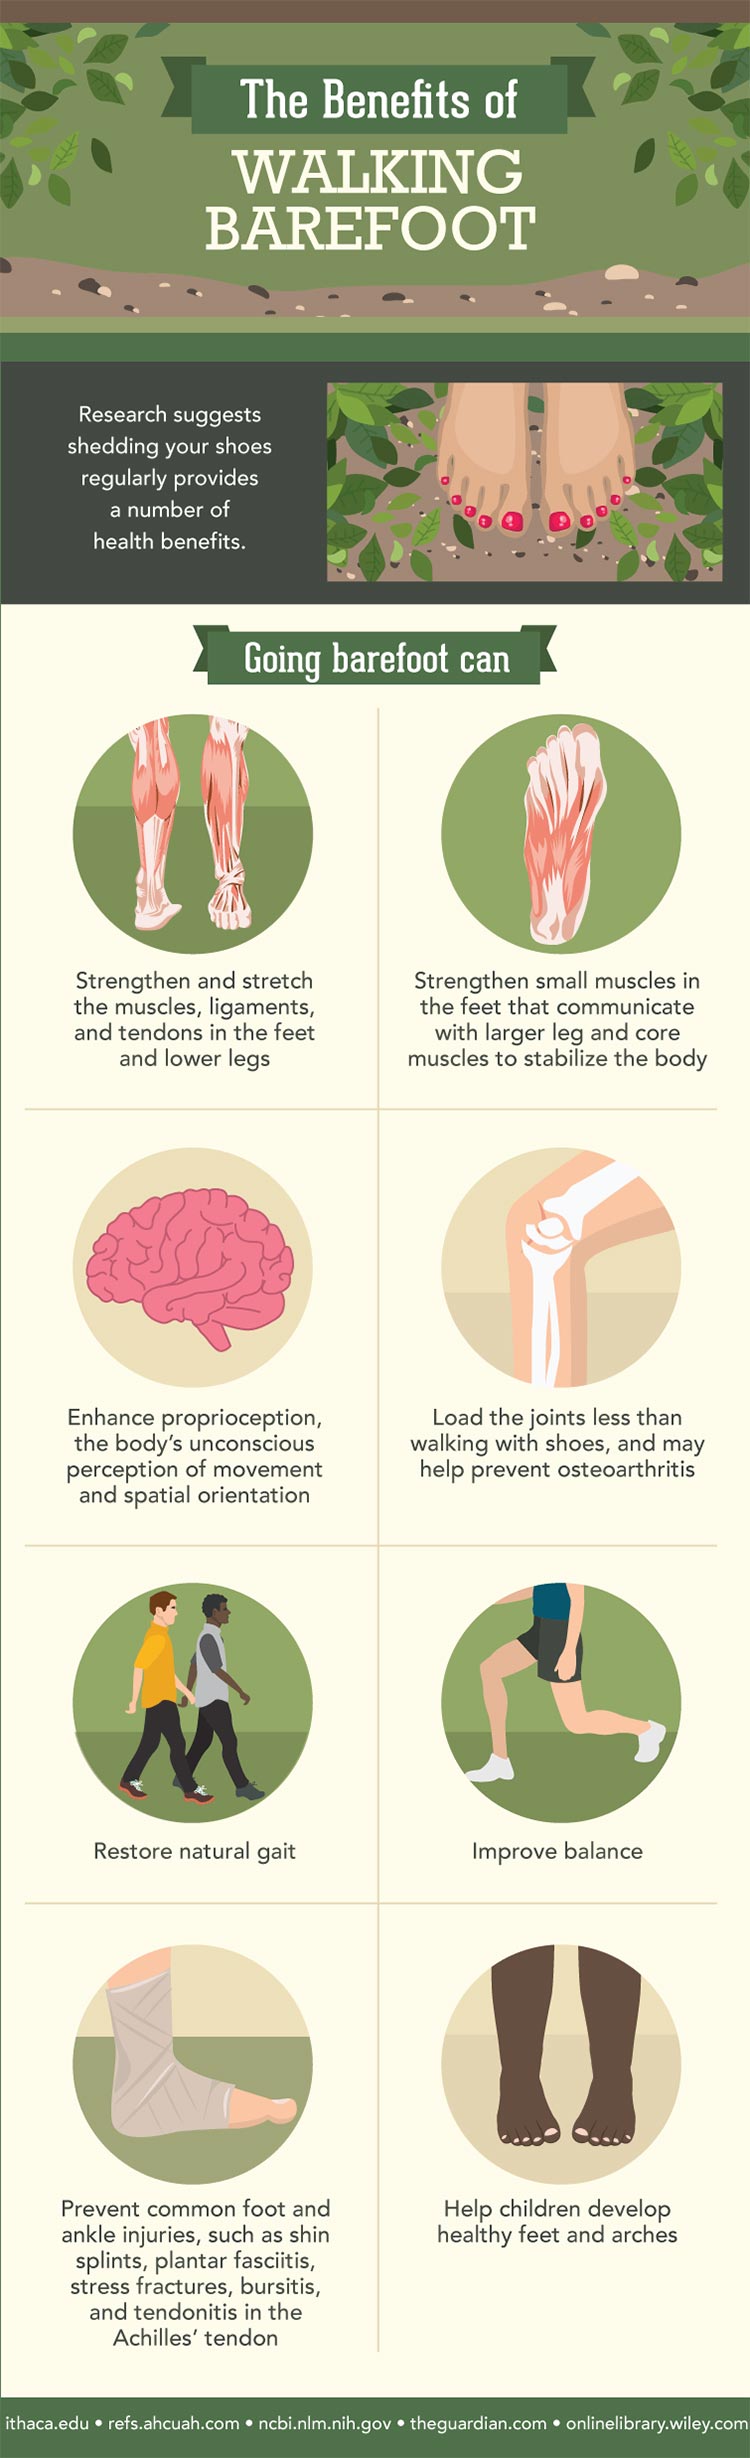 Benefits of walking barefoot, University Foot and Ankle Institute